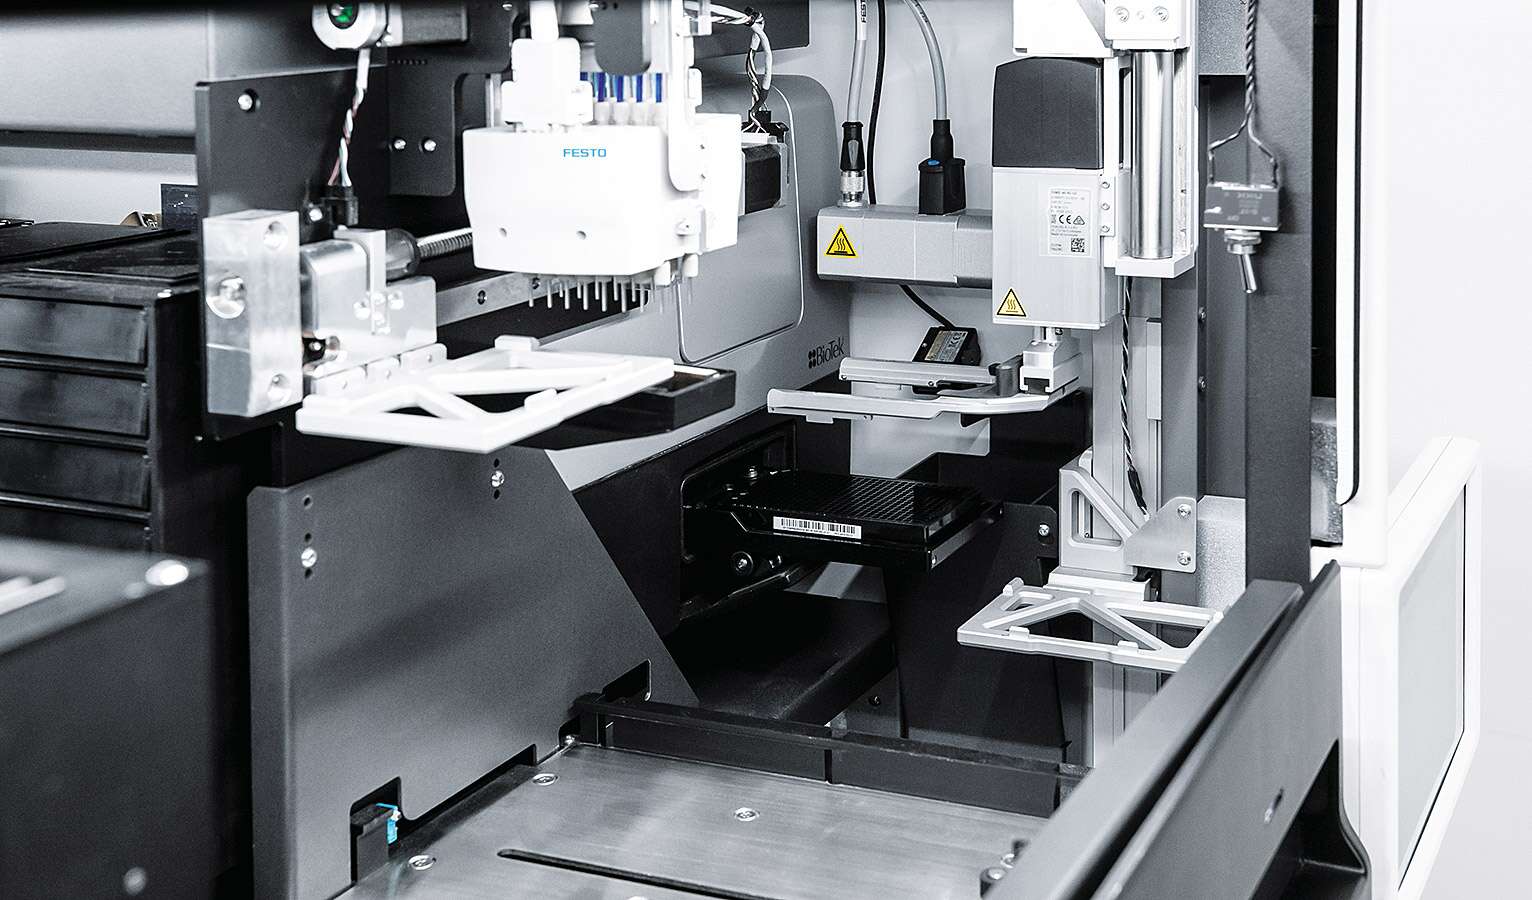 How Festo Components Play a Role in the Battle Against Antibiotic-Resistant Bacteria